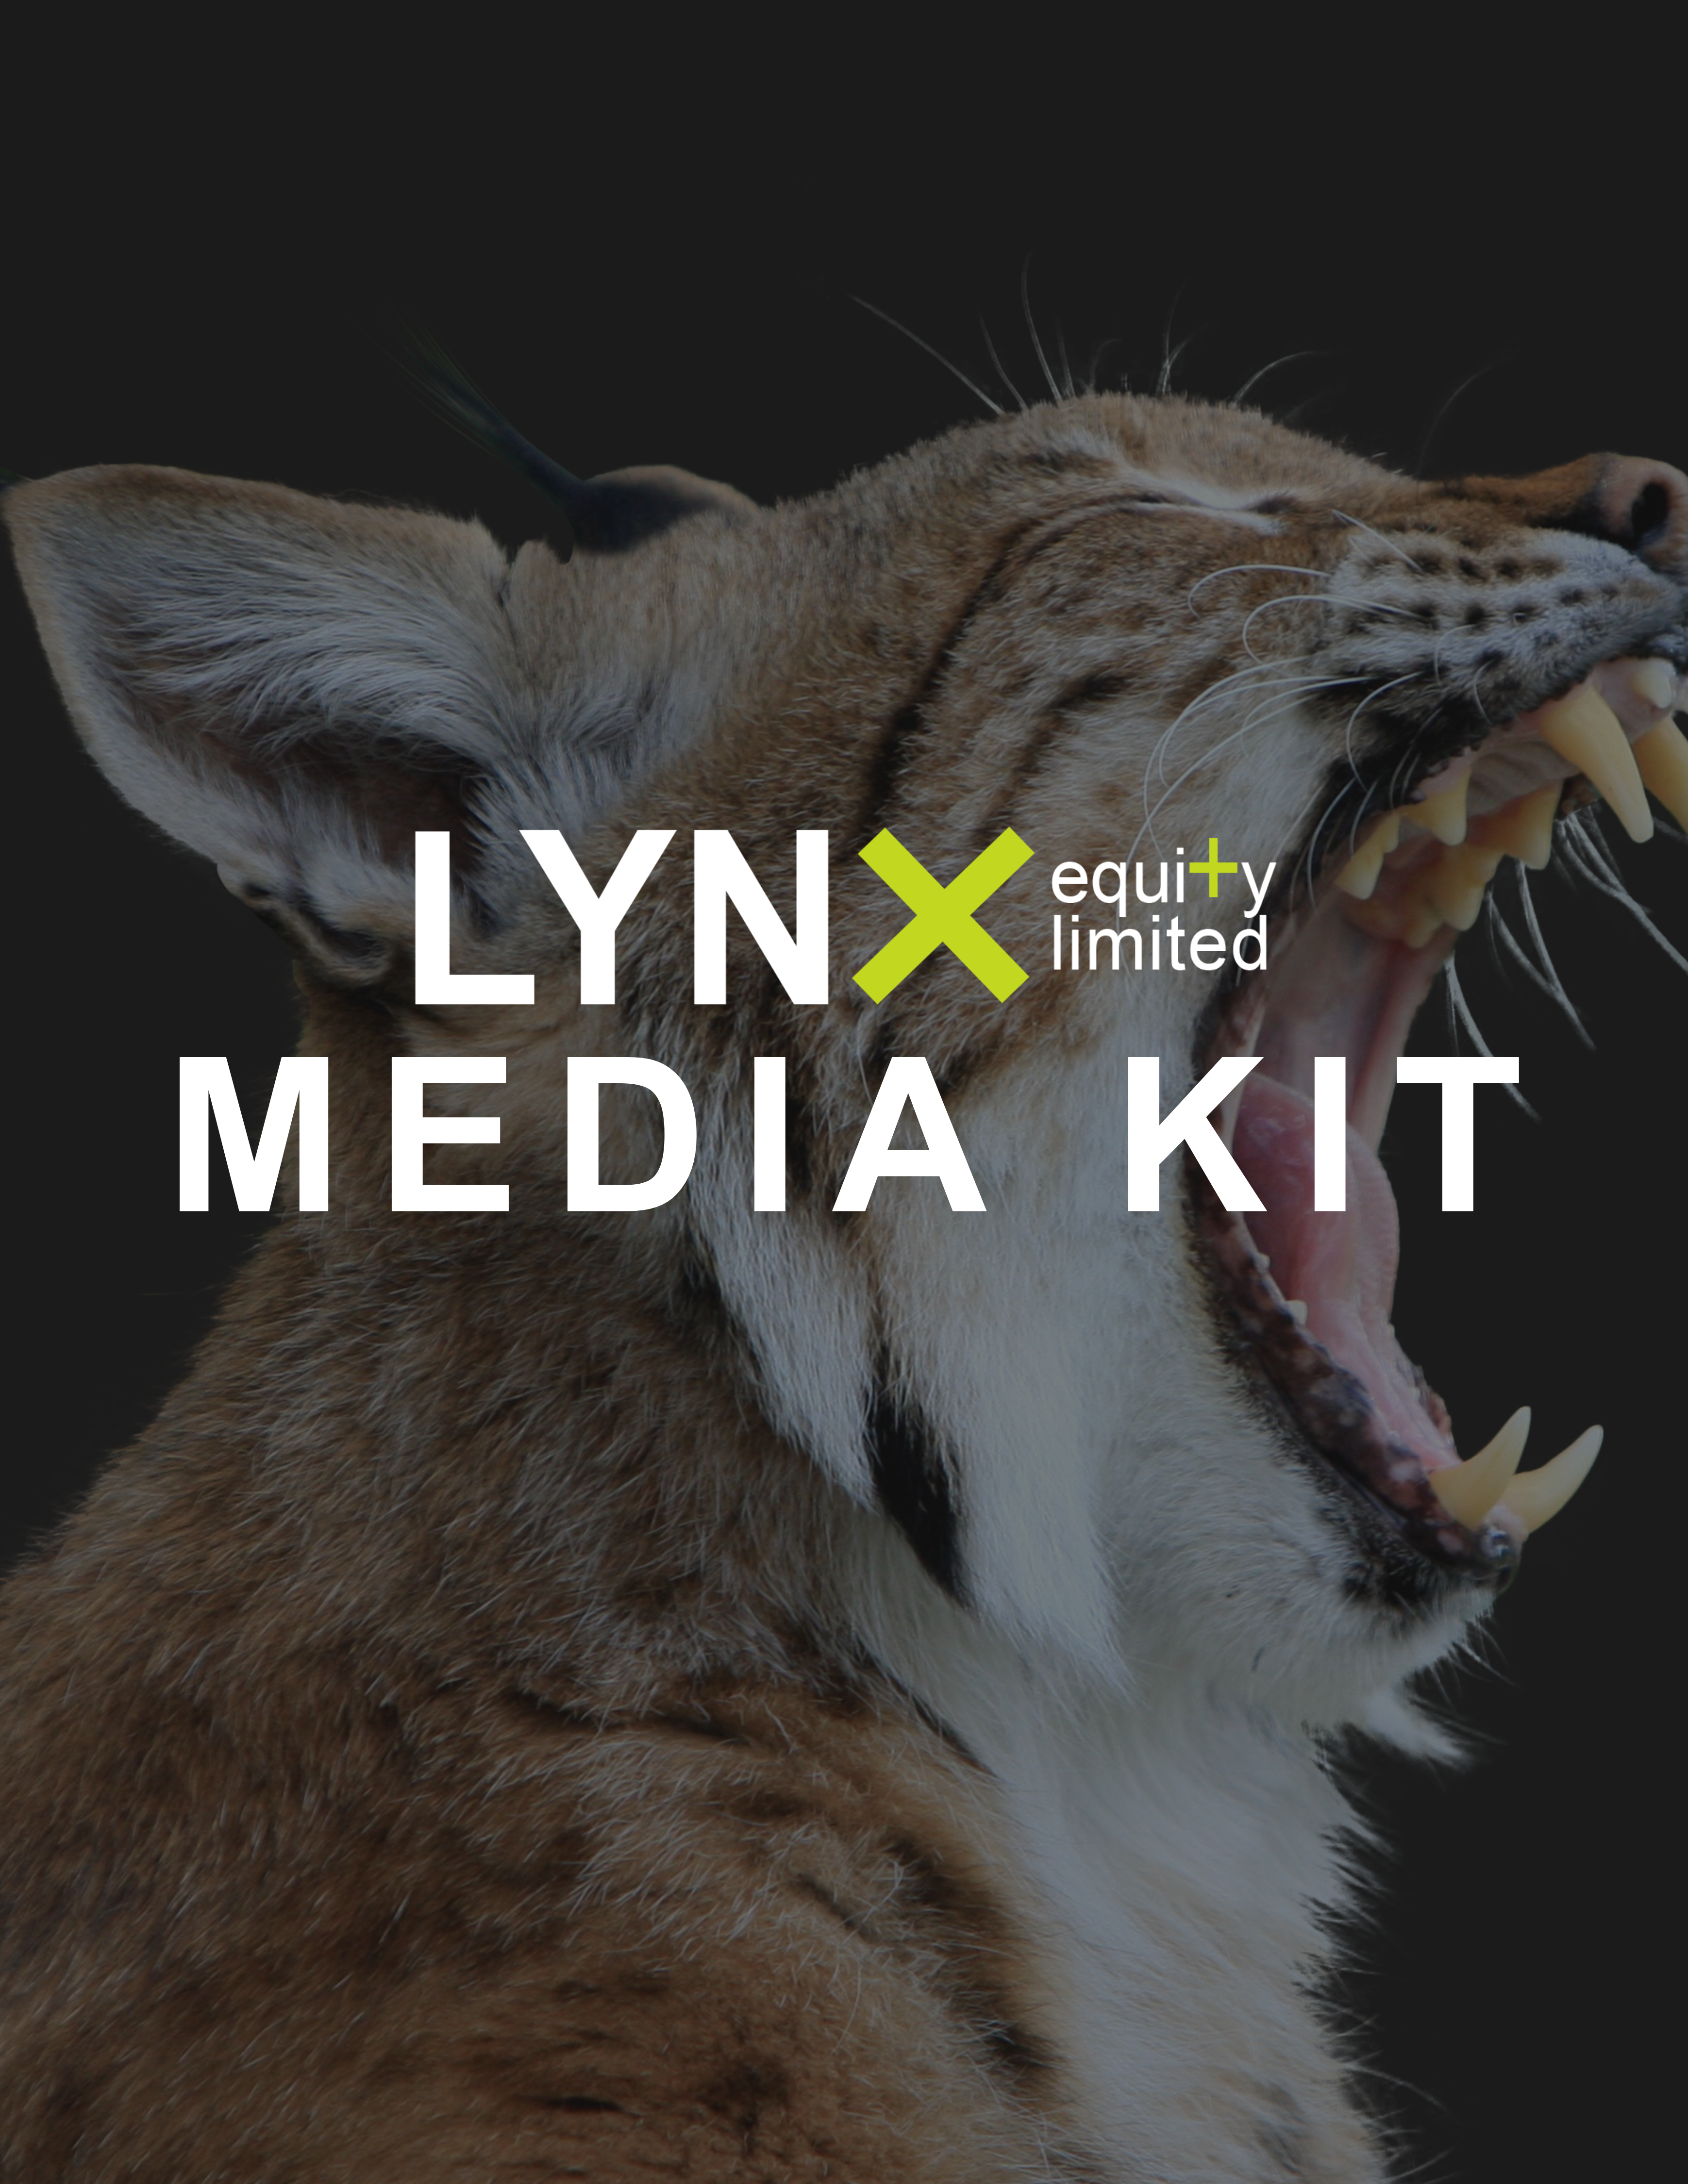 Interested in featuring Lynx?